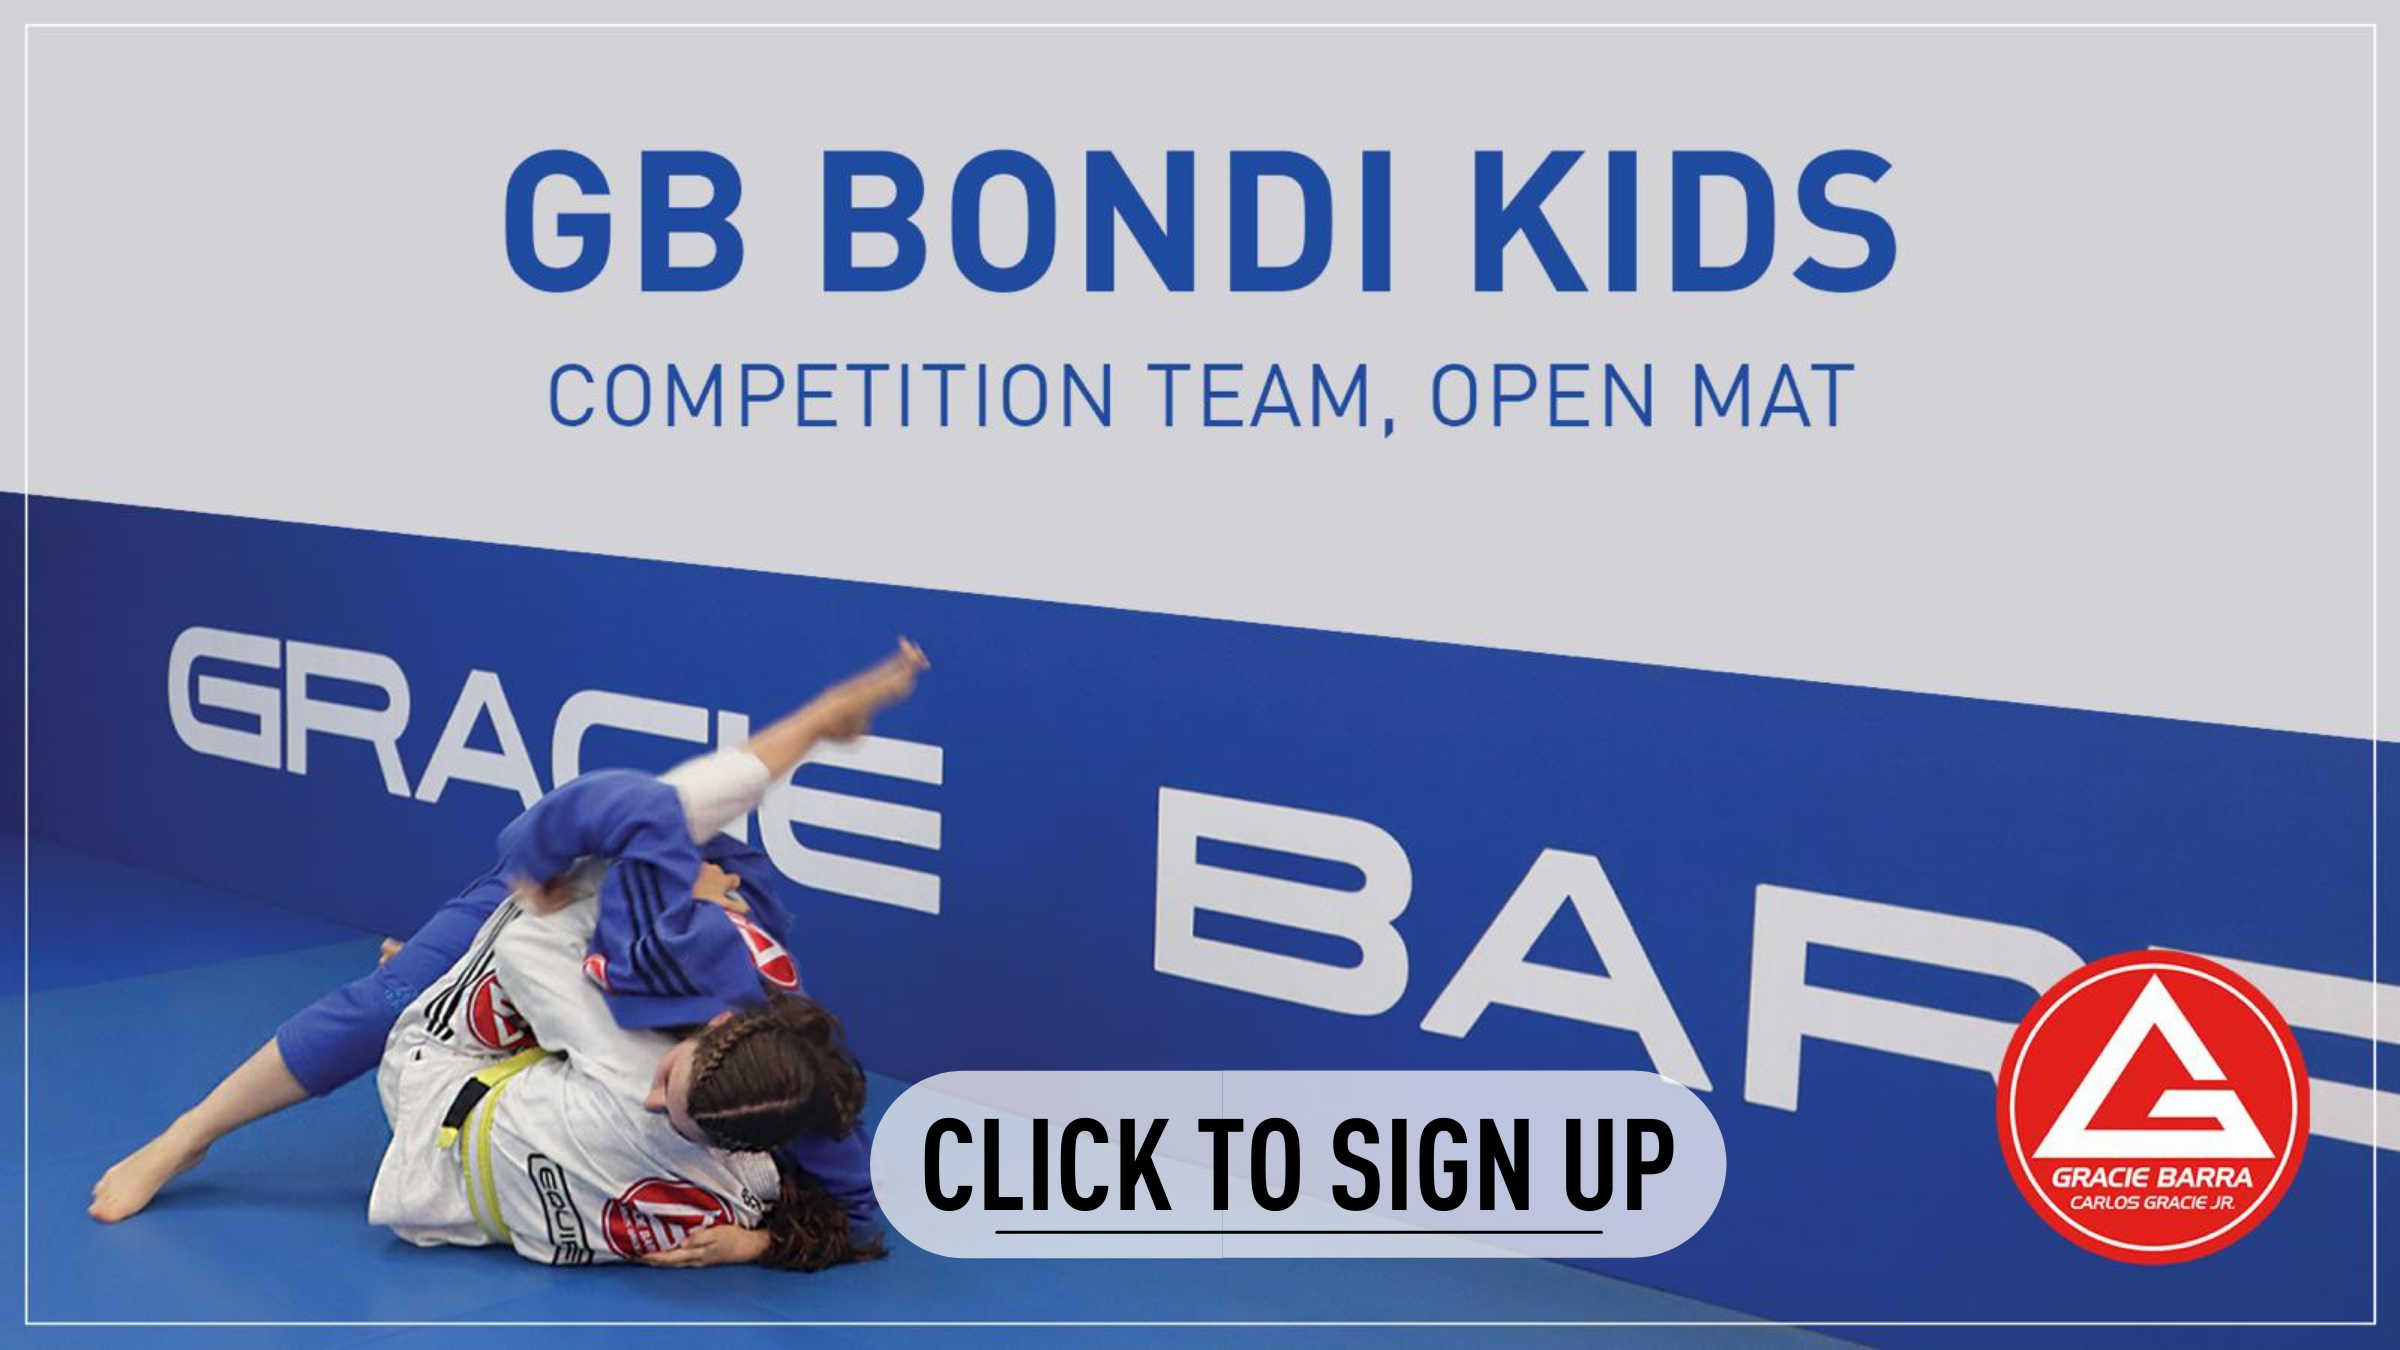 Join us for our Kids Competition Team Open Mat. Sign up at https://form.jotform.com/210900605535043